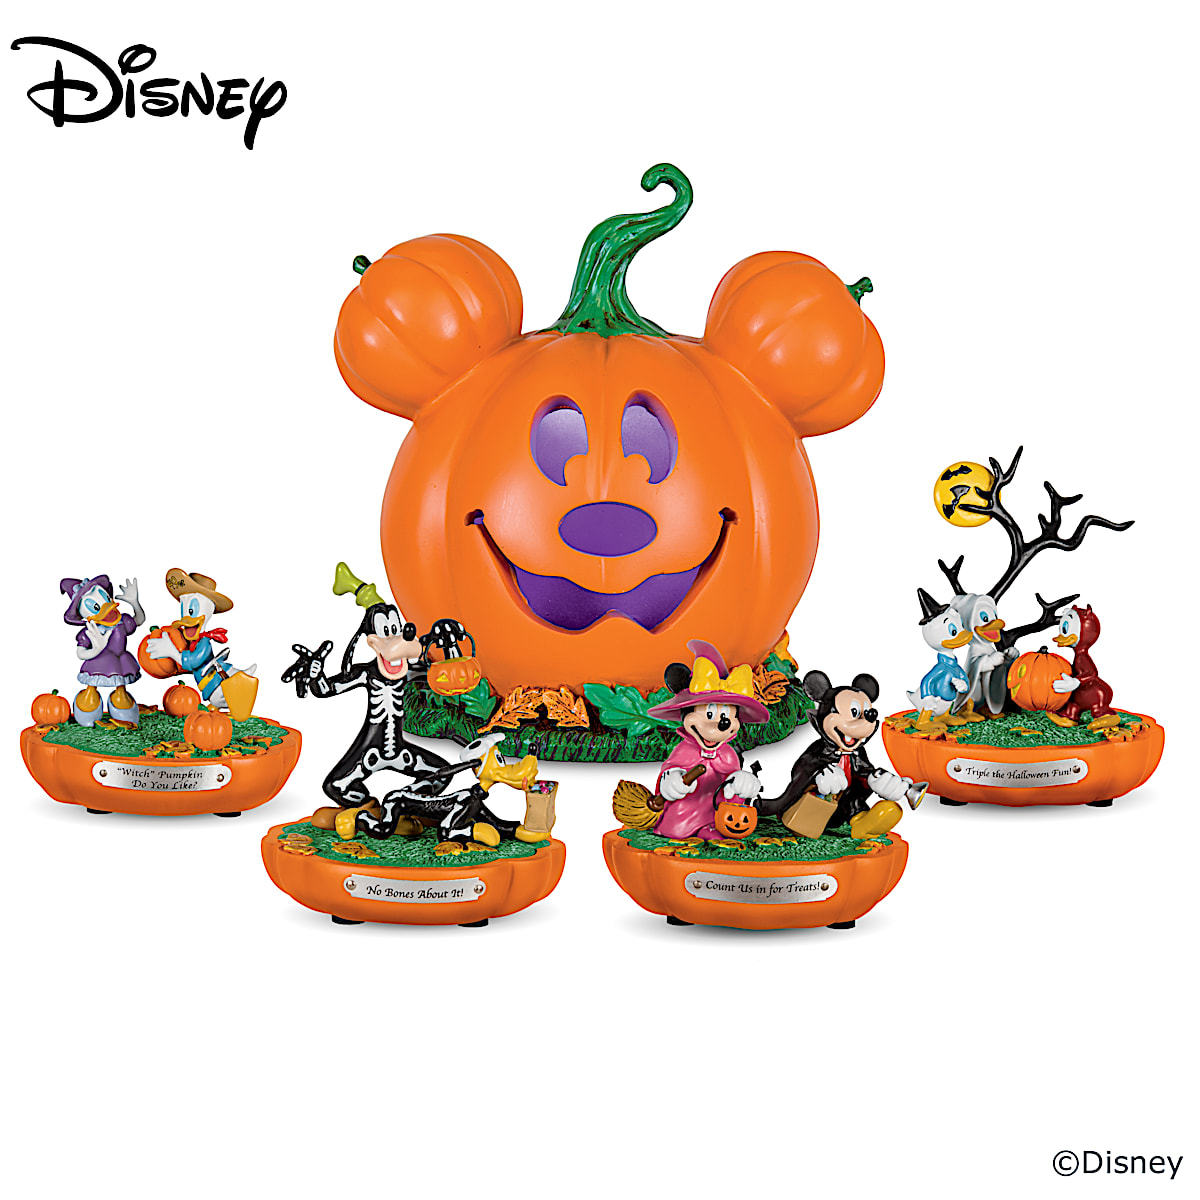 Mattel Shows Off Two Disney Halloween-Themed Little People Collector Sets